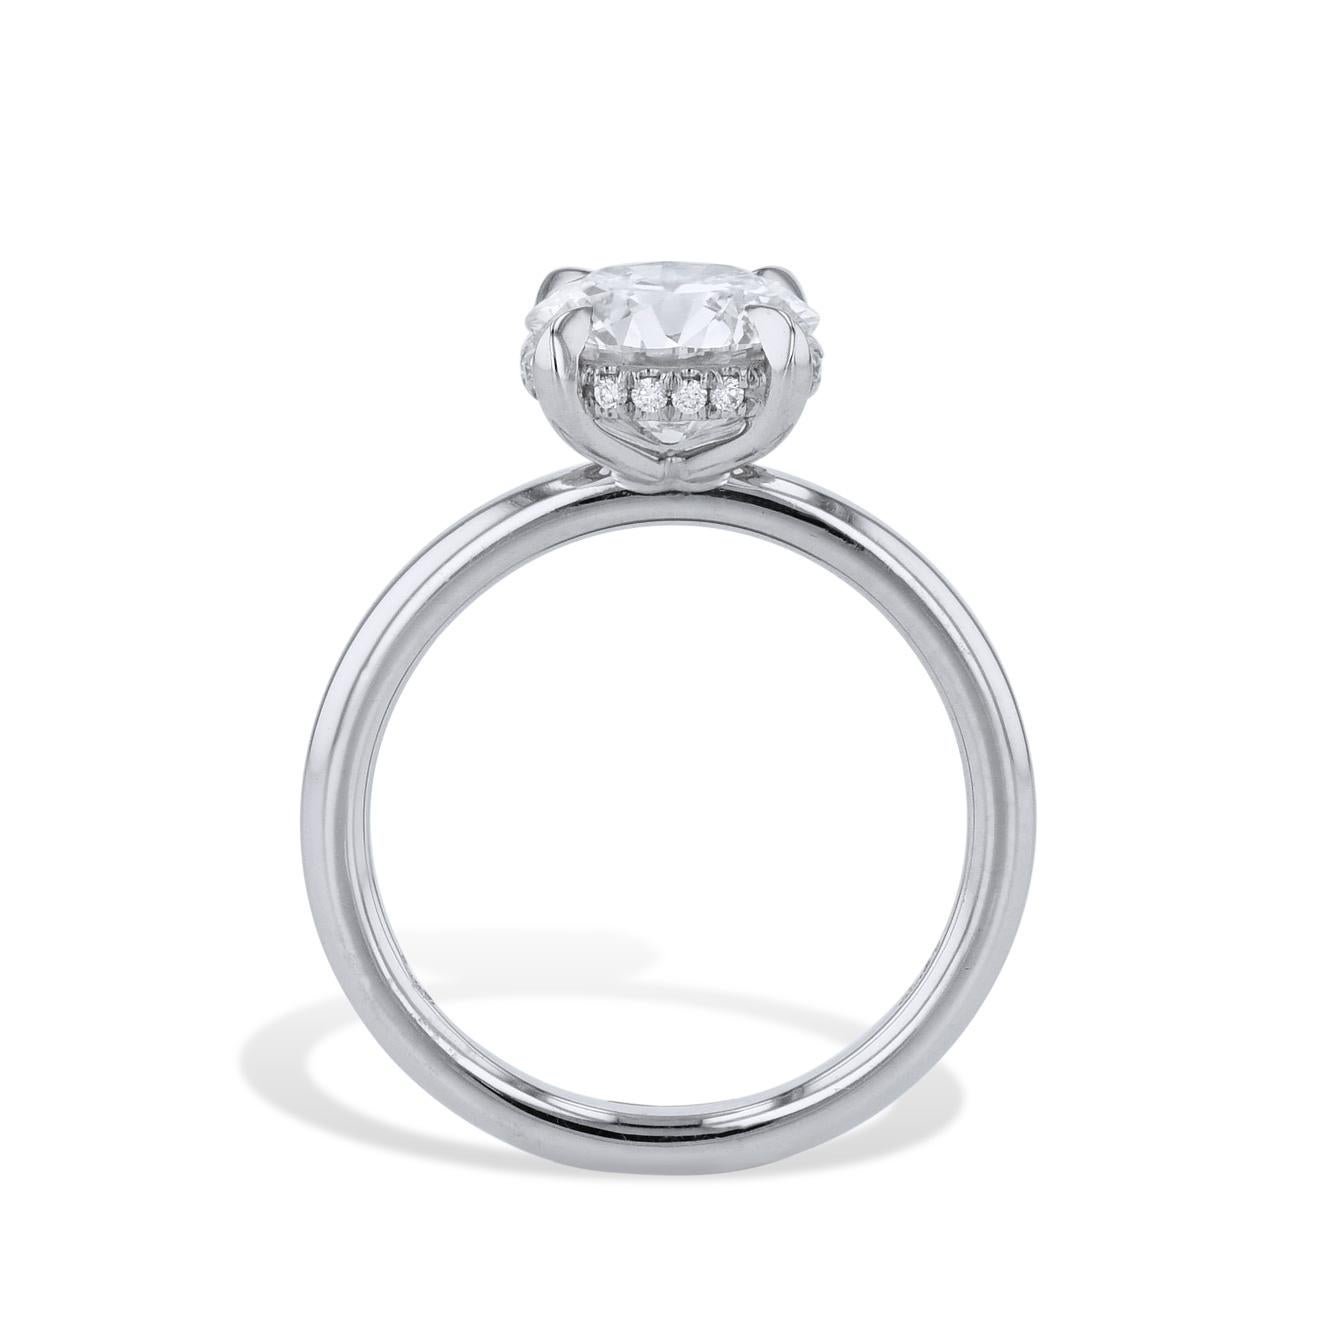 Experience luxurious brilliance with this extraordinary Round Diamond Platinum Engagement Ring. Adorned with a magnificent  round diamond at the center, it's complemented by a dazzling diamond pave underneath the basket. This one-of-a-kind piece is